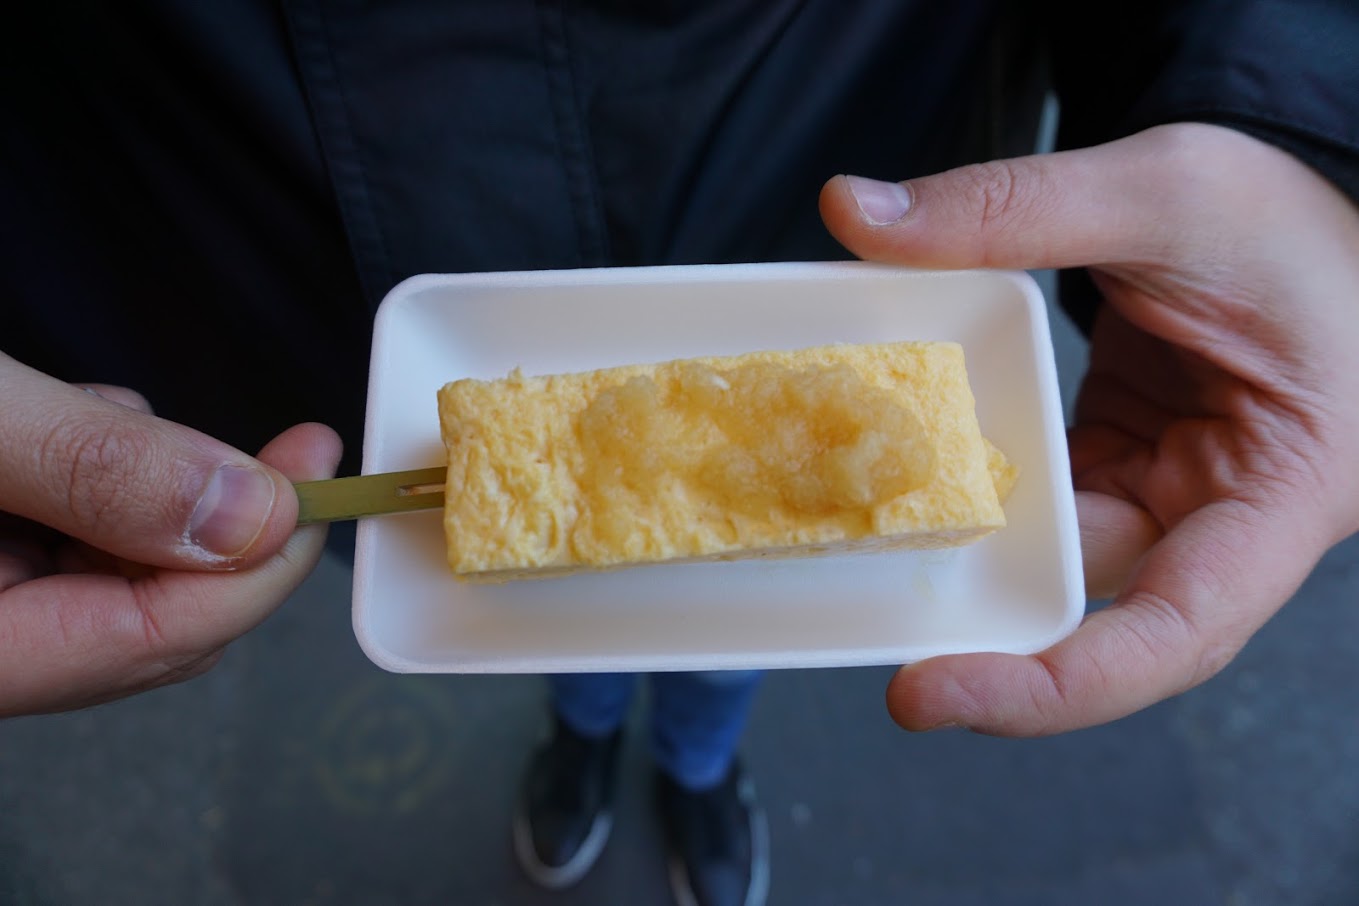 Greg from You Could Travel holding Tamagoyaki purchased at Tsukiji Market